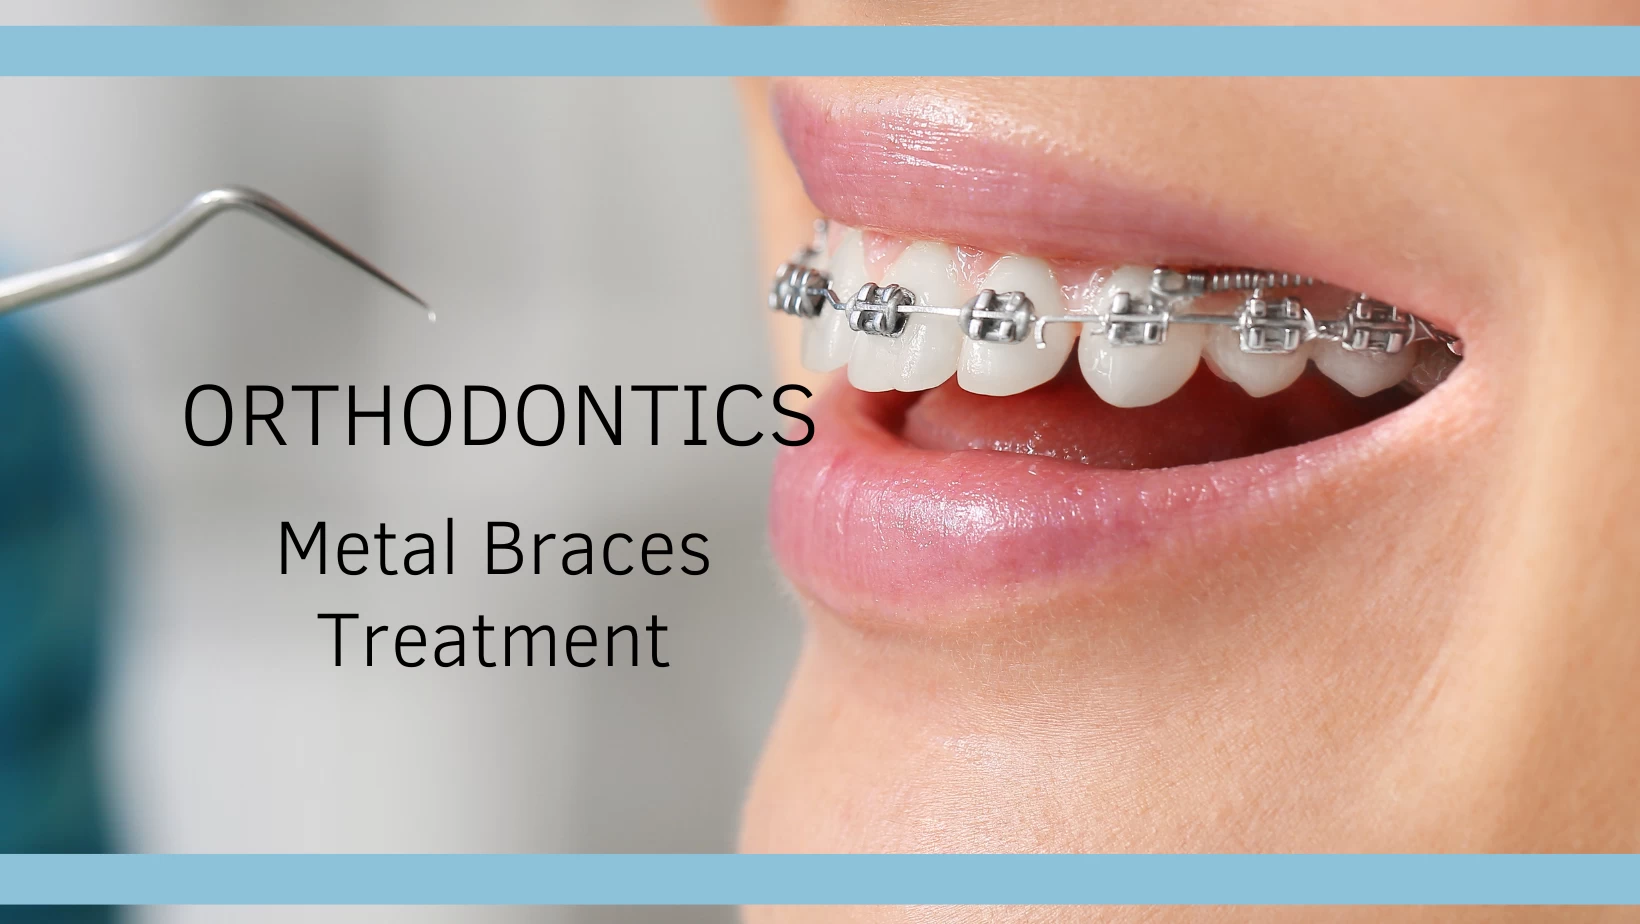 How are Metal Braces Treatment Made?